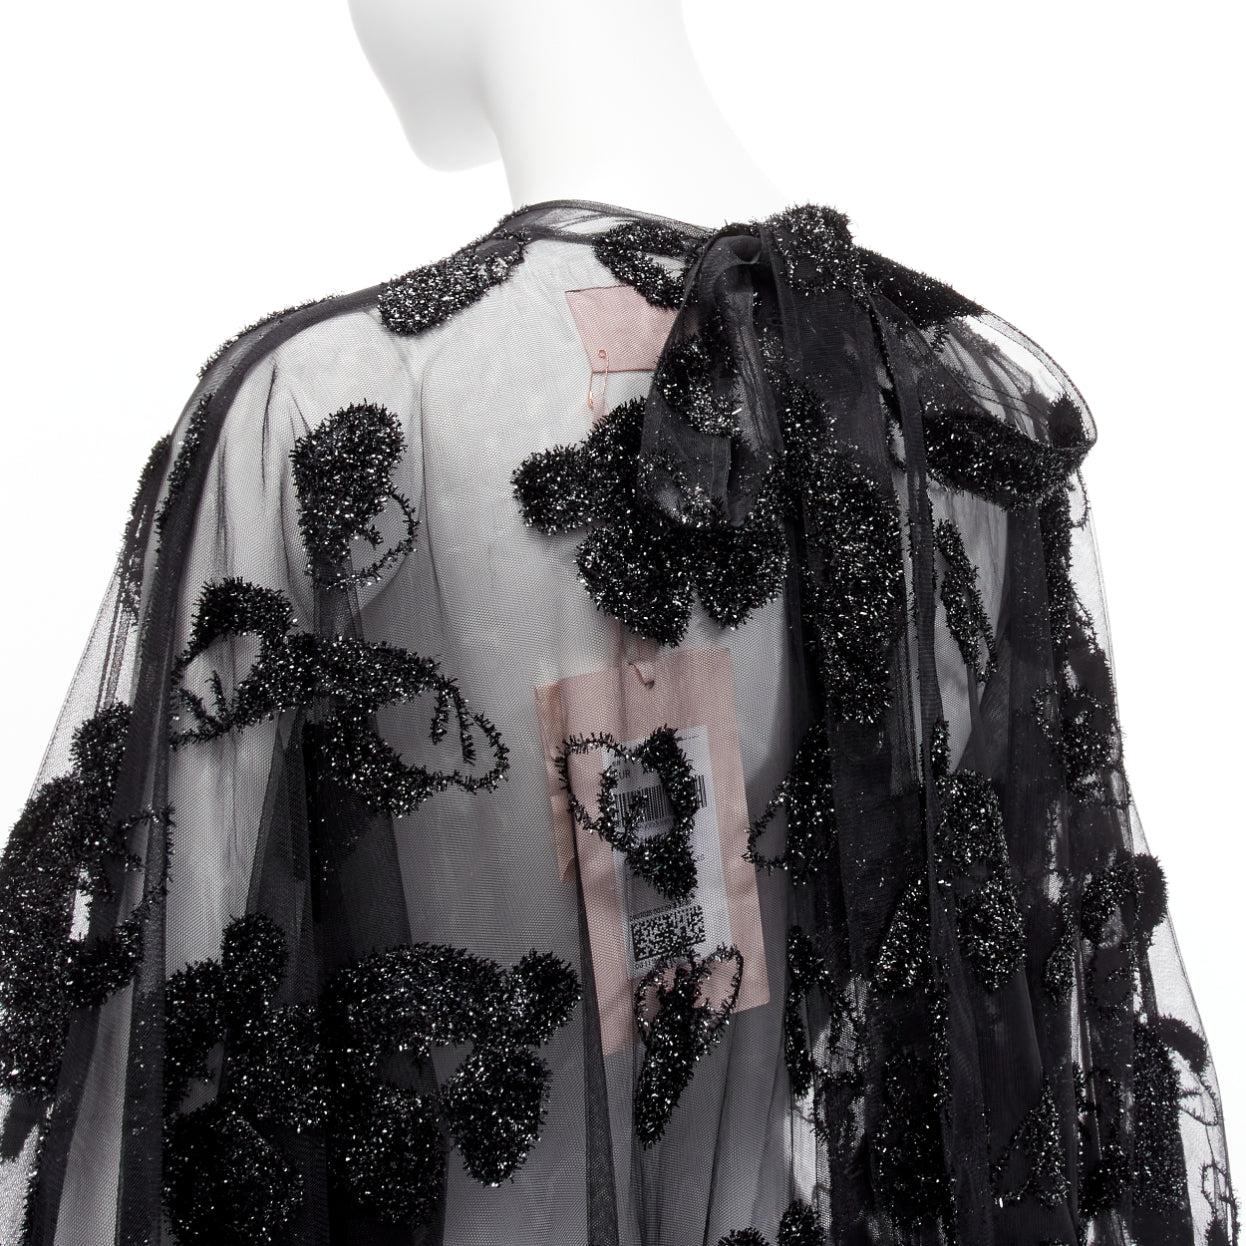 new SIMONE ROCHA H&M black tinsel floral embroidery sheer dolman midi dress UK6 XS
Reference: LNKO/A02188
Brand: Simone Rocha
Collection: H&M
Material: Polyester
Color: Black
Pattern: Solid
Closure: Button
Extra Details: Back buttons.
Made in: